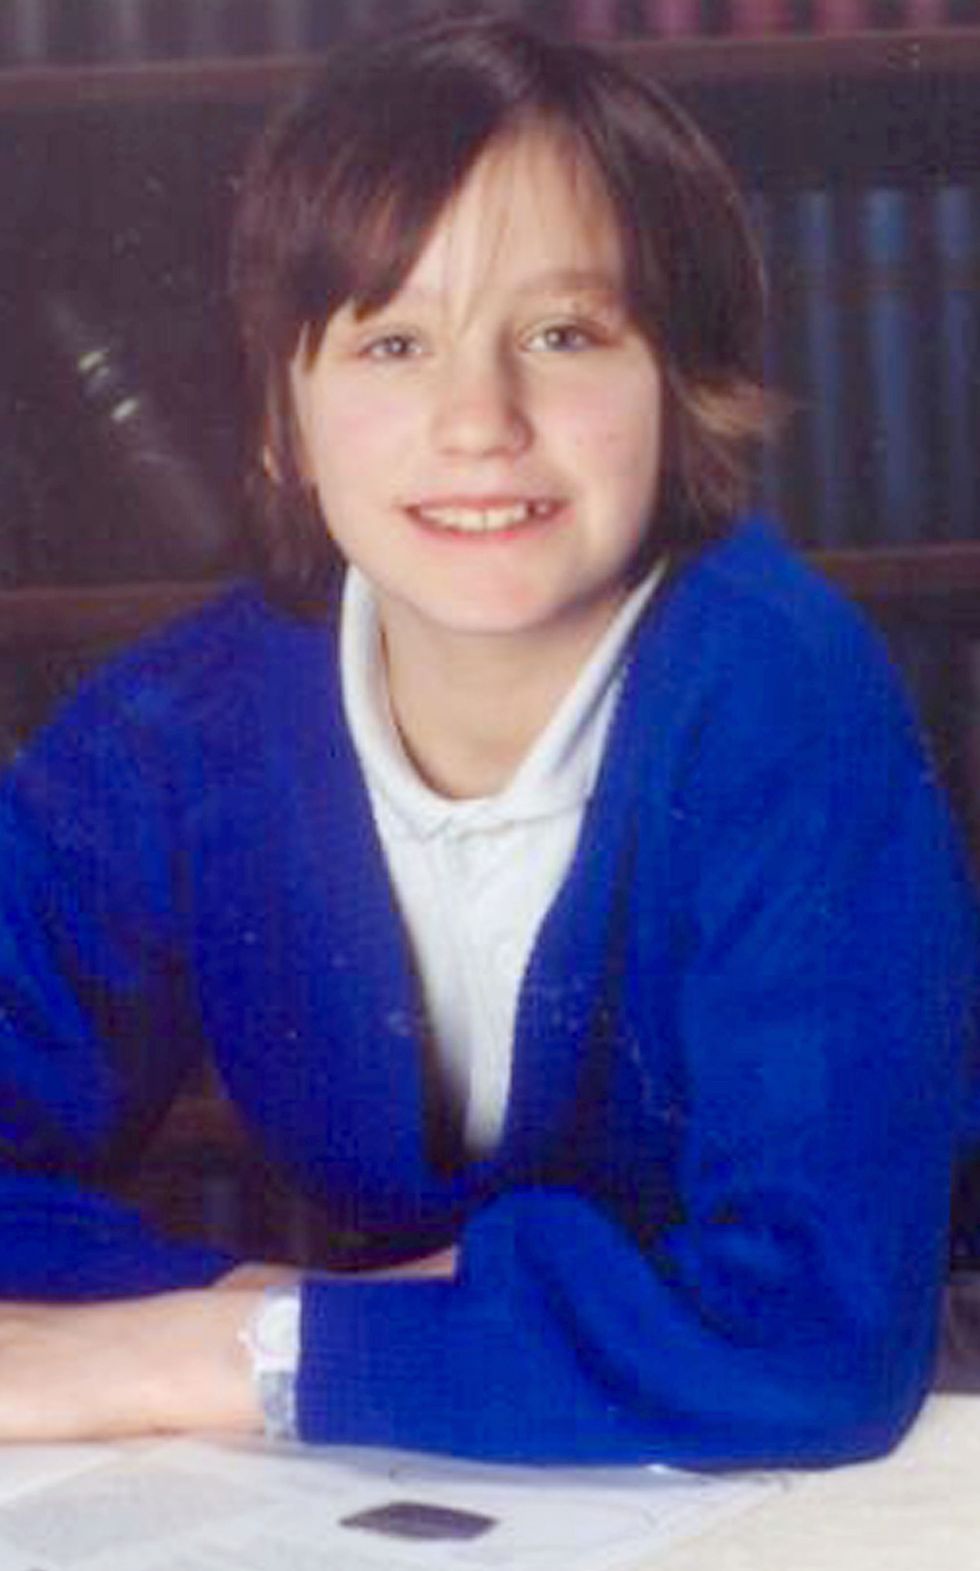 Detectives are set to begin digging an area of land in connection with the disappearance of the 14-year-old girl, Sarah Benford, from a care home more than 20 years ago. Issue date: Monday November 15, 2021.